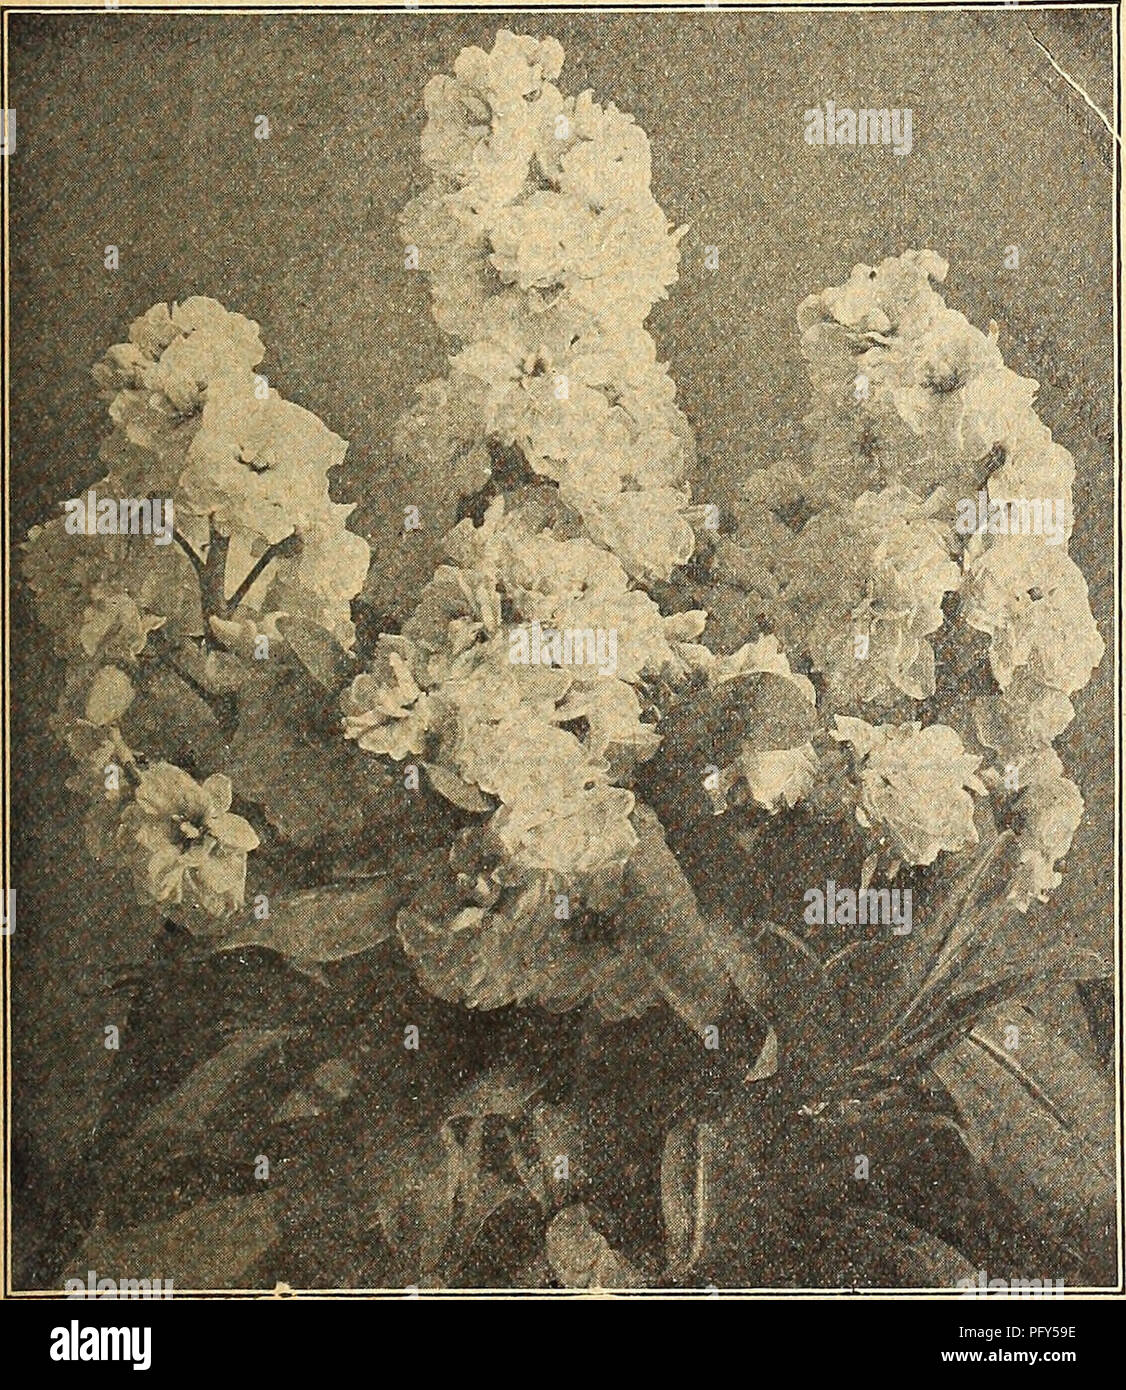 . Currie's farm and garden annual : spring 1918 43rd year. Flowers Seeds Catalogs; Bulbs (Plants) Seeds Catalogs; Vegetables Seeds Catalogs; Nurseries (Horticulture) Catalogs; Plants, Ornamental Catalogs; Gardening Equipment and supplies Catalogs. Salv. Stocks—Beauty of Nice. STOCK OR GILLIFLOWERS. Sown in heat in the early spring and afterwards in the open ground as soon as nice weather has set in, a continuation of bloom can be had all season. They are of delightful fragrance, and are much used as cut flowers. Our strains of stocks are all that can be desired. H. H. A. LARGE FLOWERING DWARF  Stock Photo